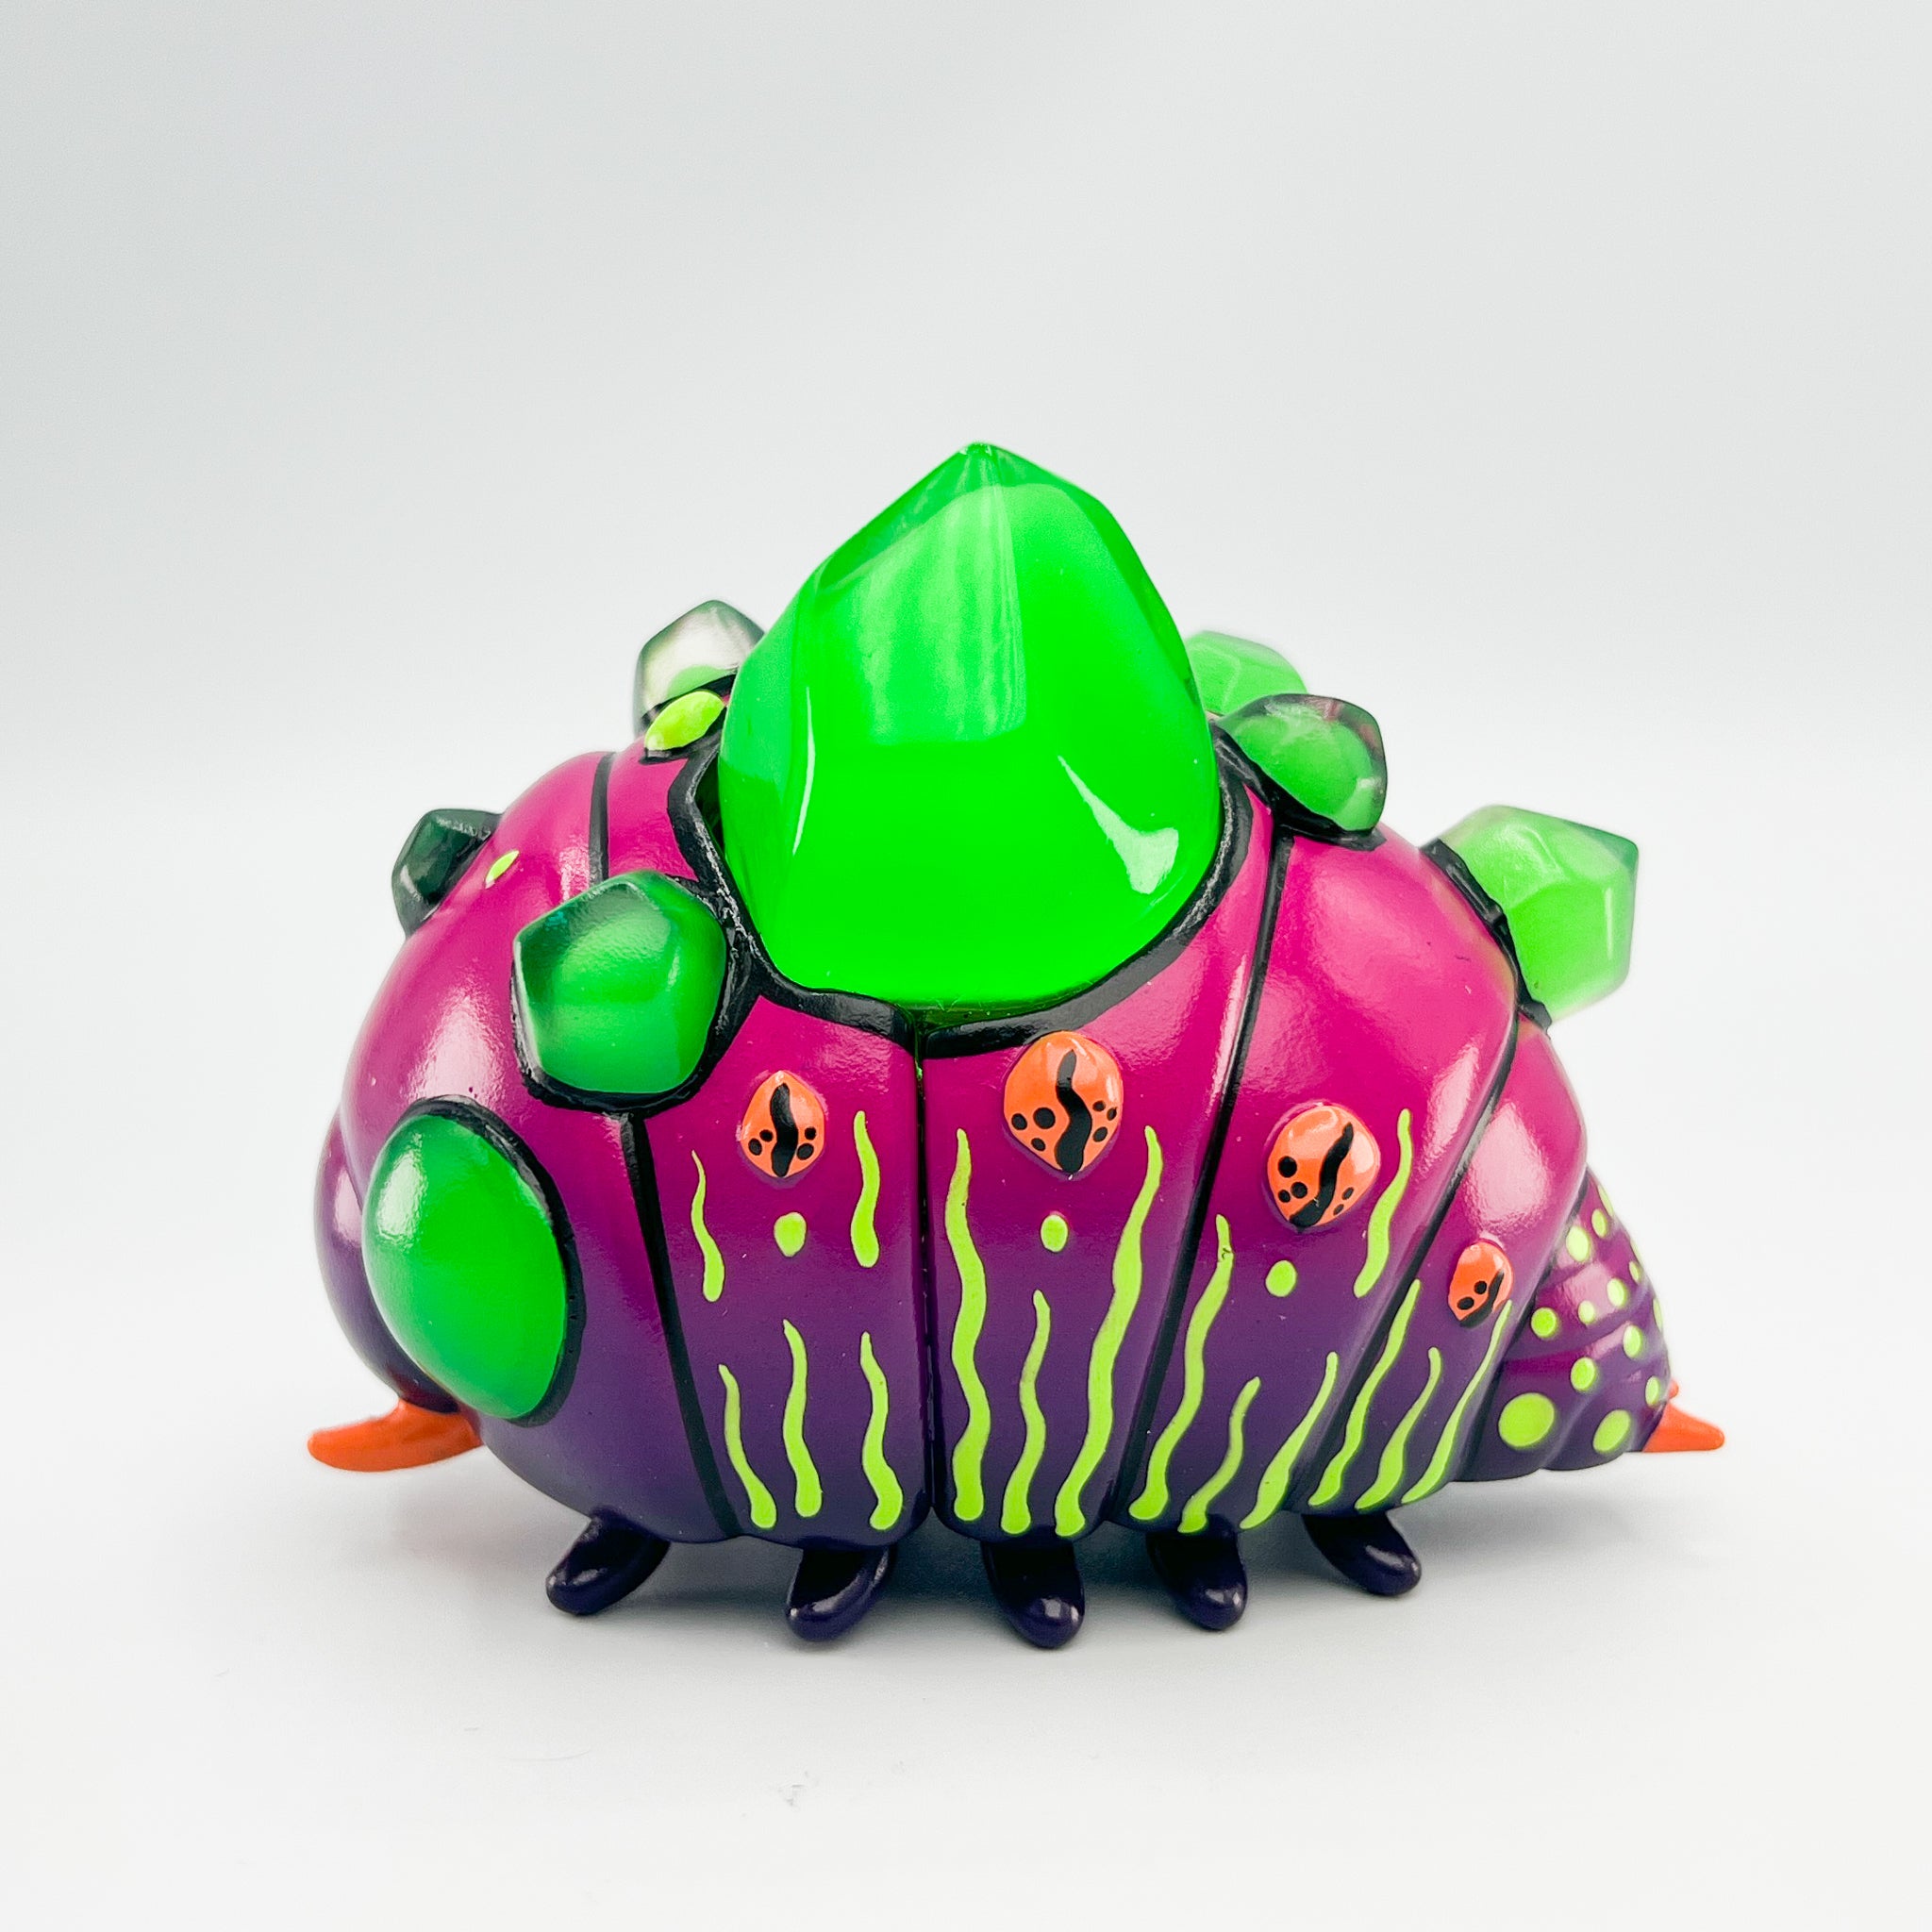 Gempod Group Exhibition - Acid-Pod by Ghost Fox